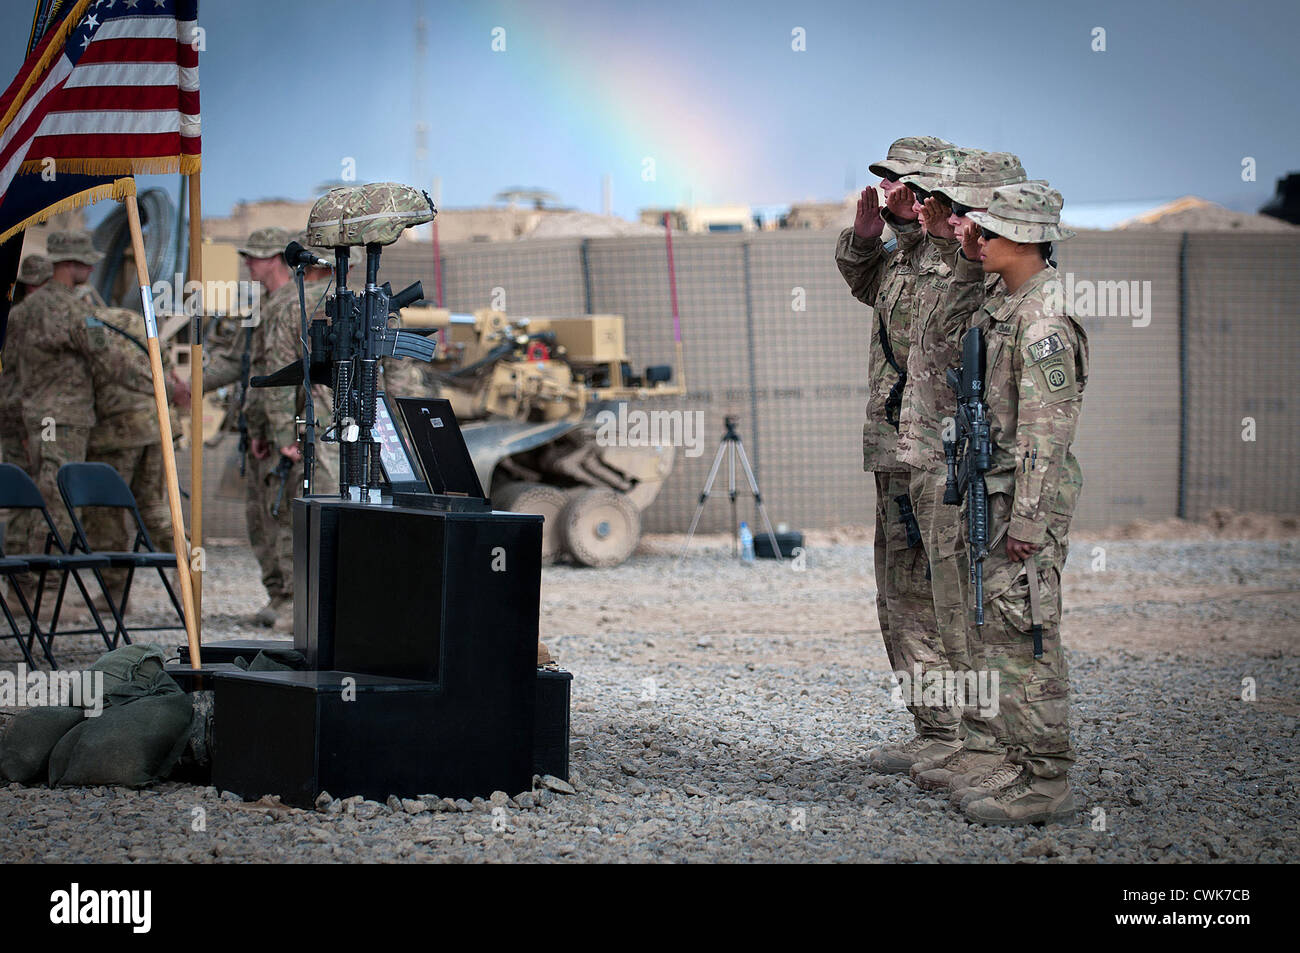 Paratroopers pay their respects to two fallen soldier during a memorial on Forward Operating Base Arian, April 27, 2012, Ghazni province, Afghanistan. Stock Photo